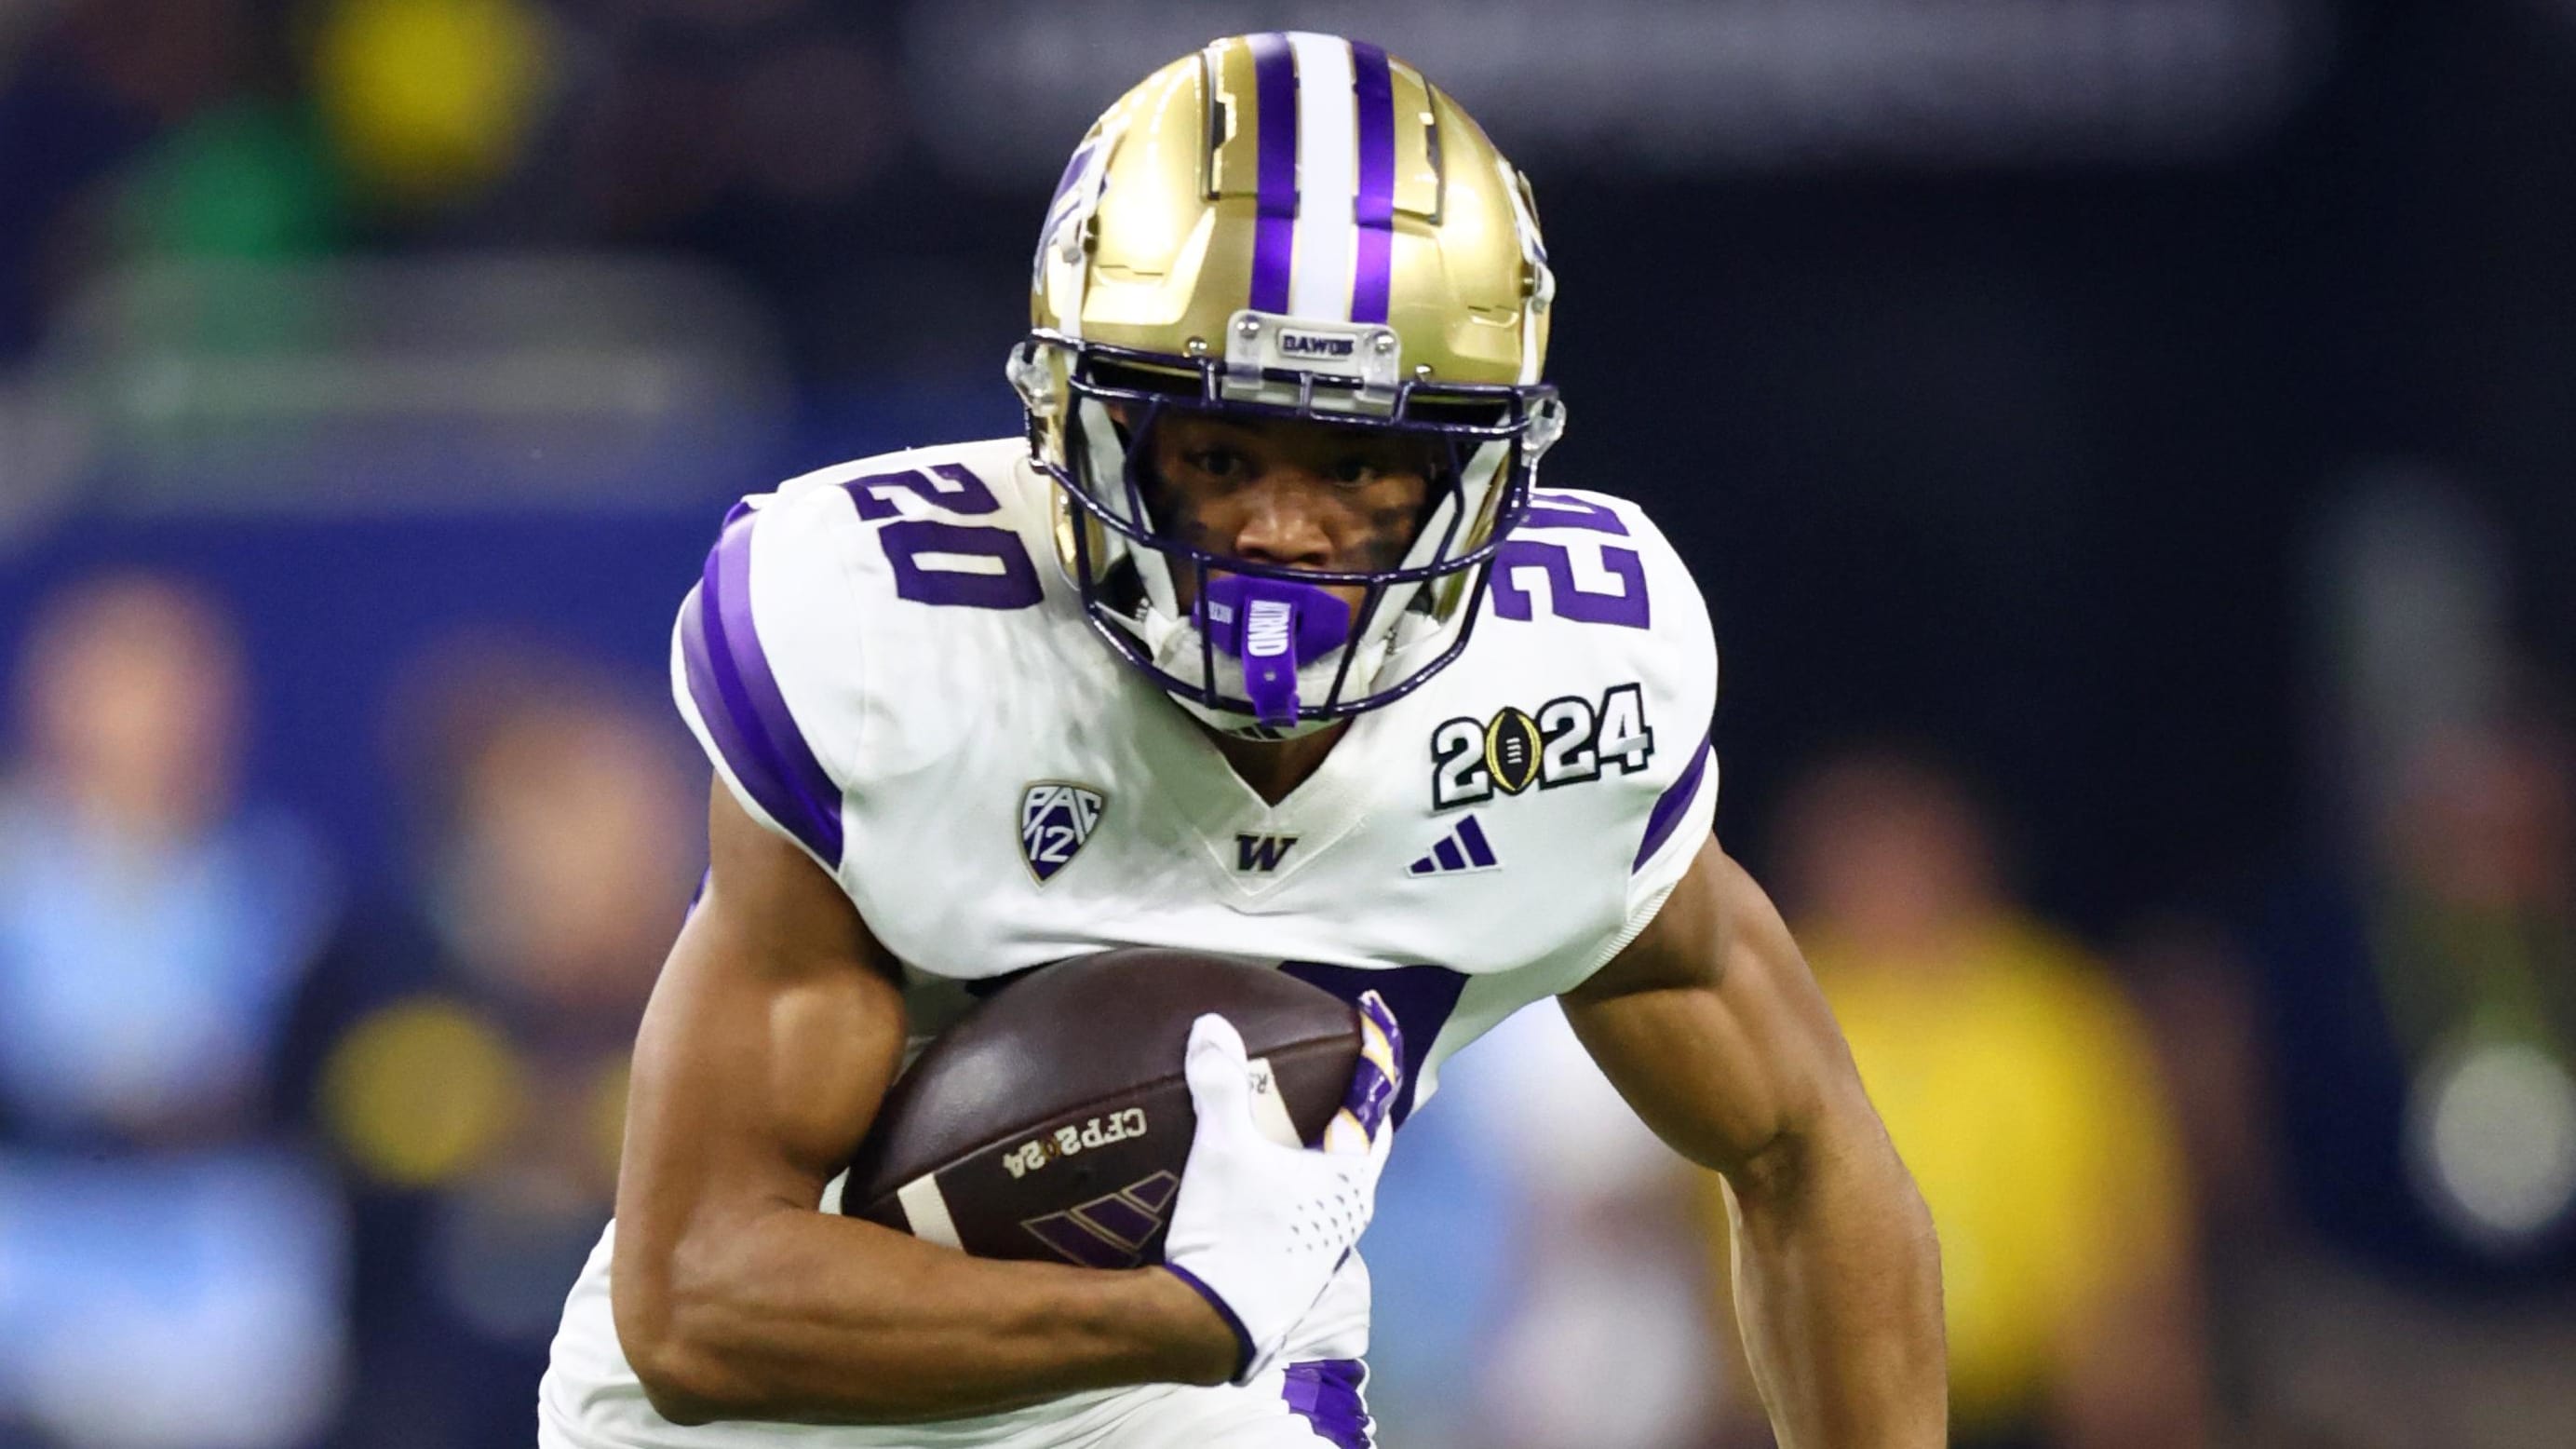 Washington RB Tybo Rogers arrested for rape, suspended from team